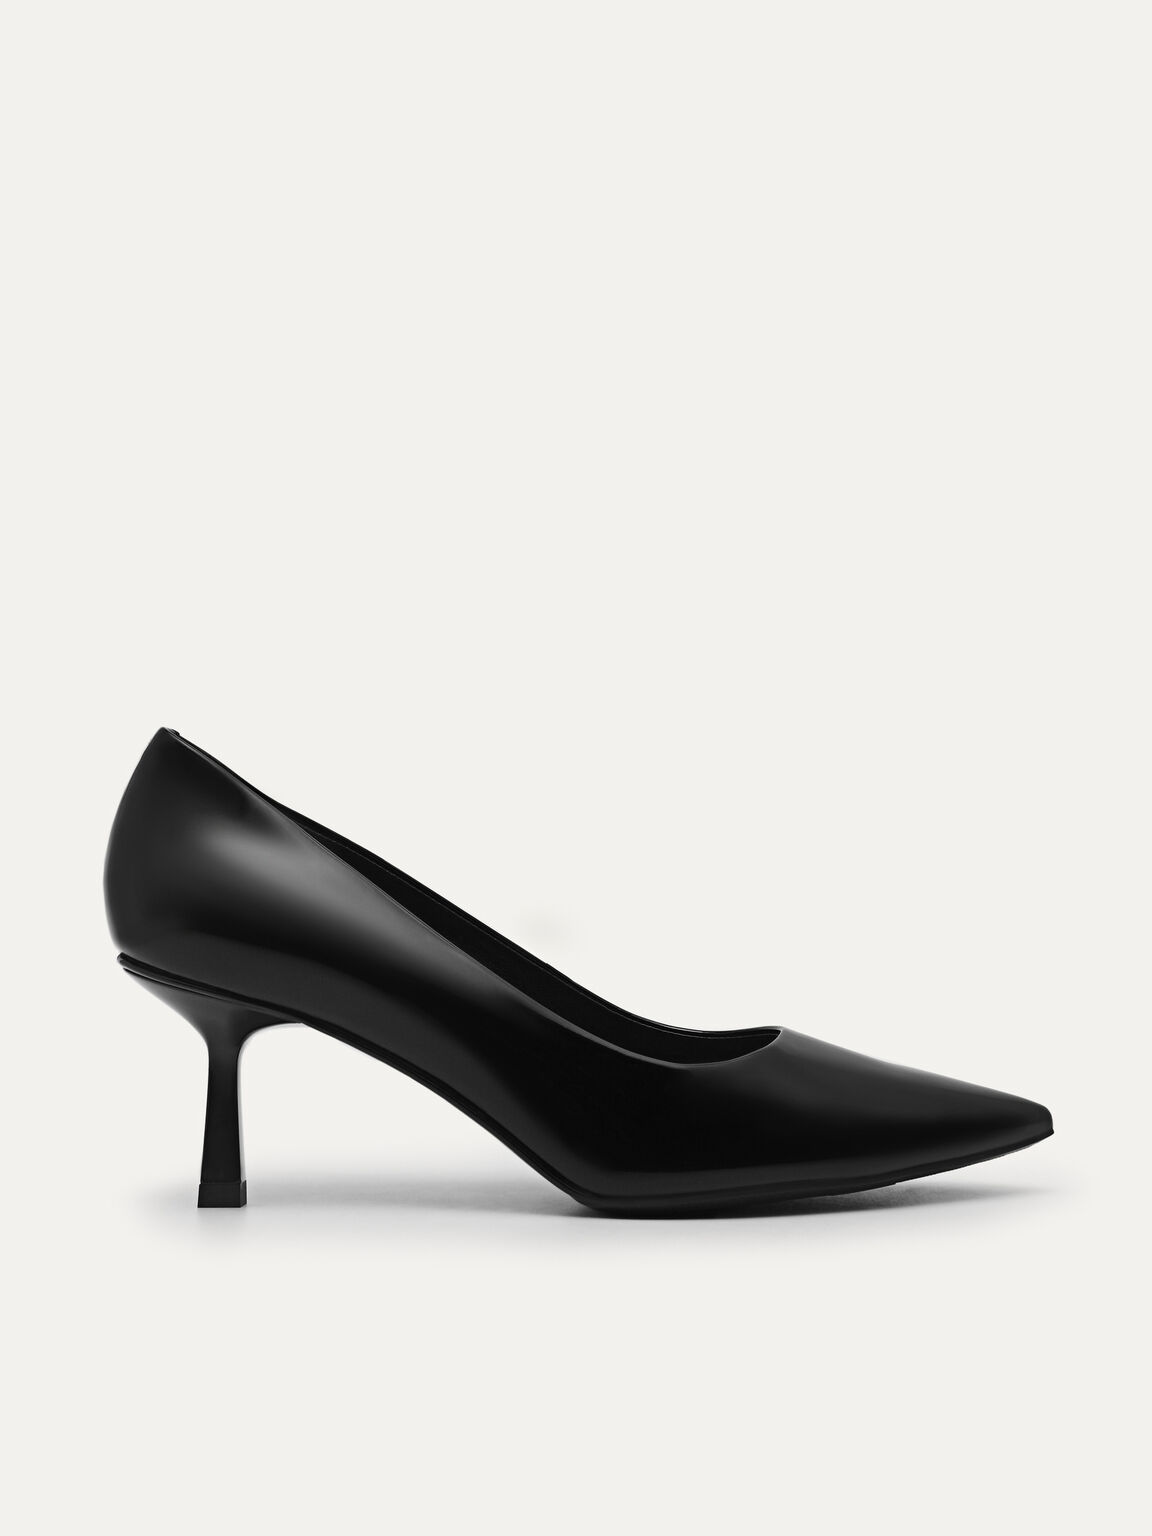 Patent Leather Pointed Pumps, Black, hi-res